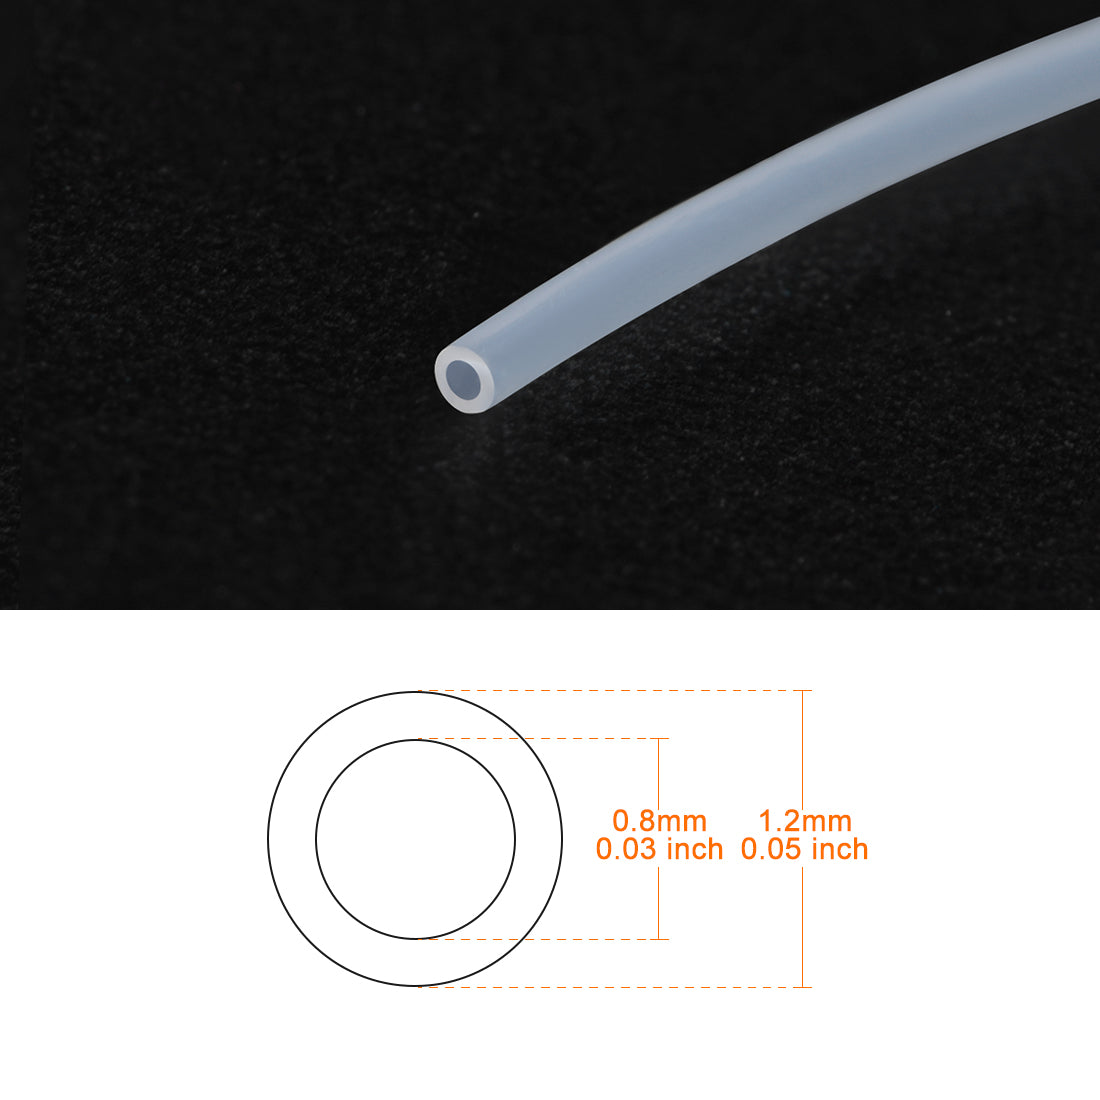 uxcell Uxcell PTFE Tube Tubing 1 Meter 3.28ft Lengh Pipe 0.8mm ID 1.2mm OD for 3D Printer RepRap